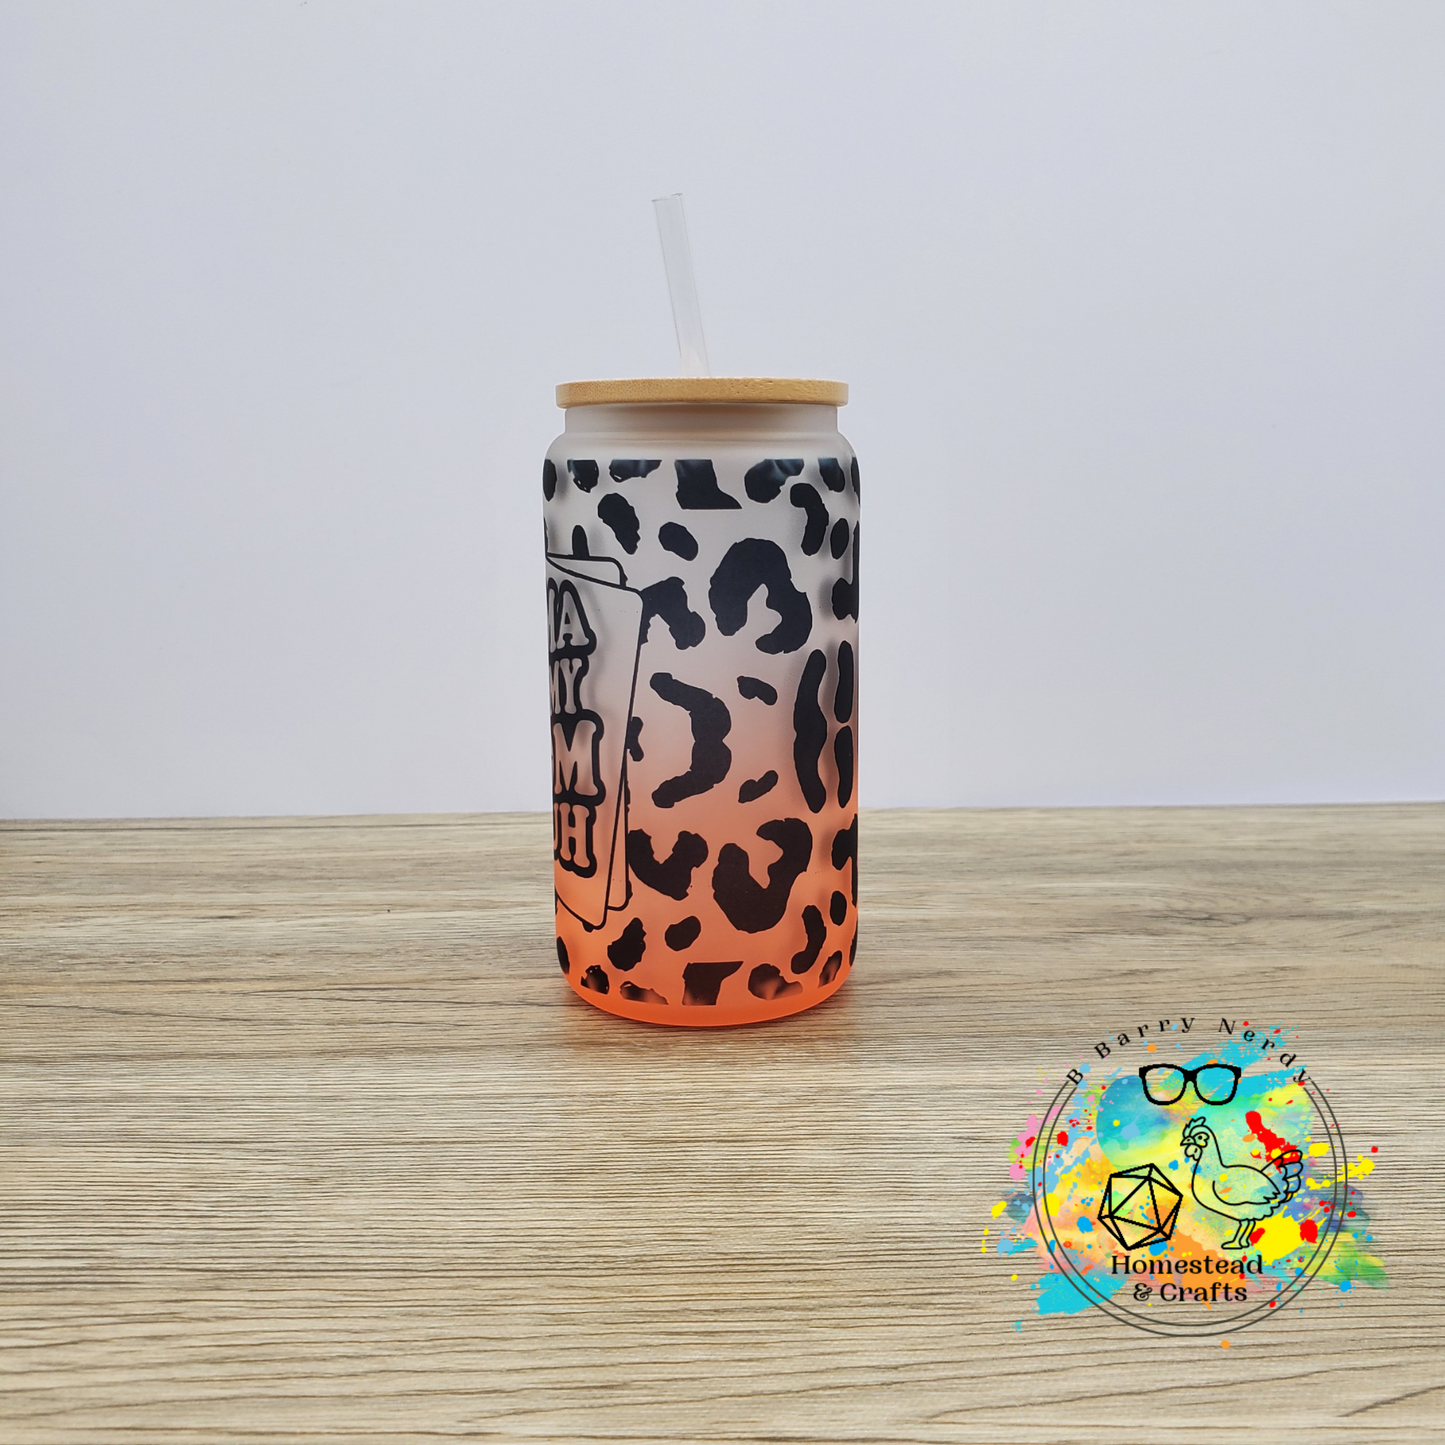 Mama, Mommy, Mom, Bruh, 16oz Sublimated Glass Can